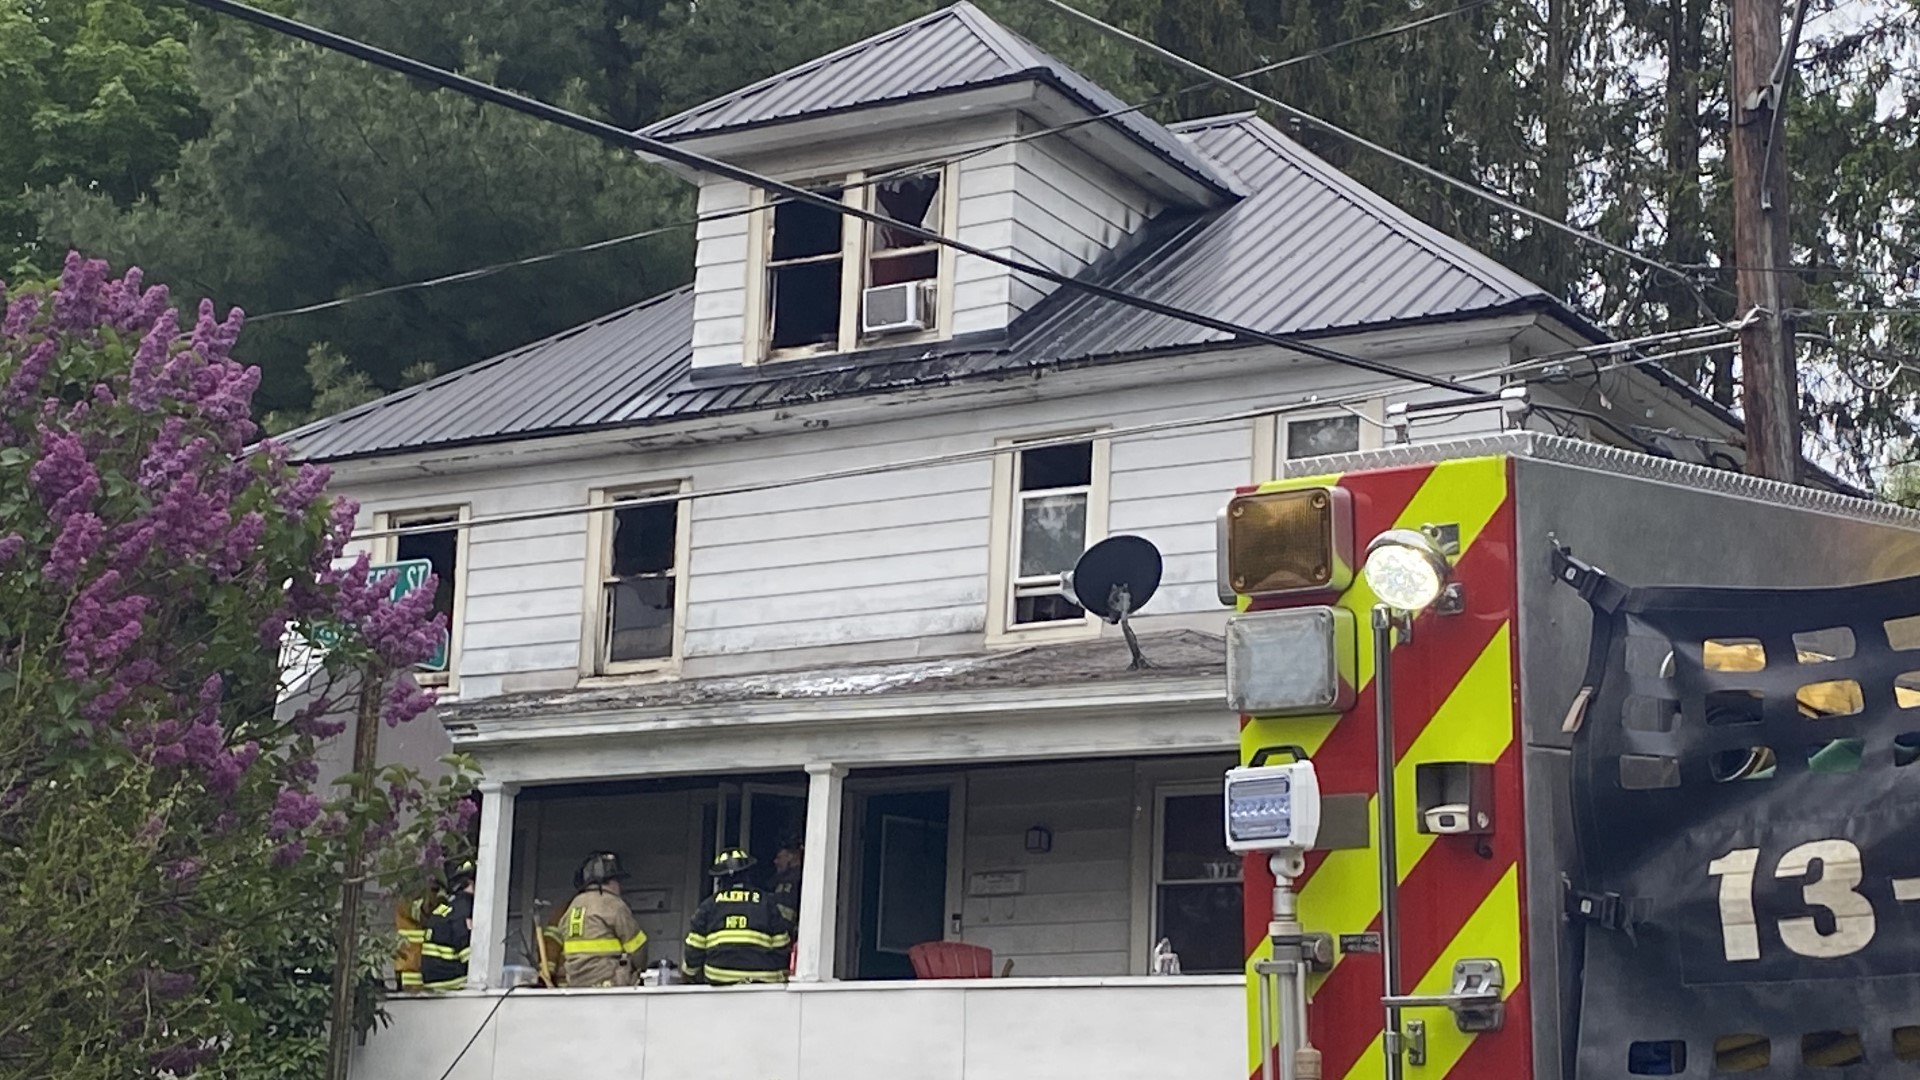 Flames broke out around 6 a.m. Saturday morning along Green Street in Honesdale.